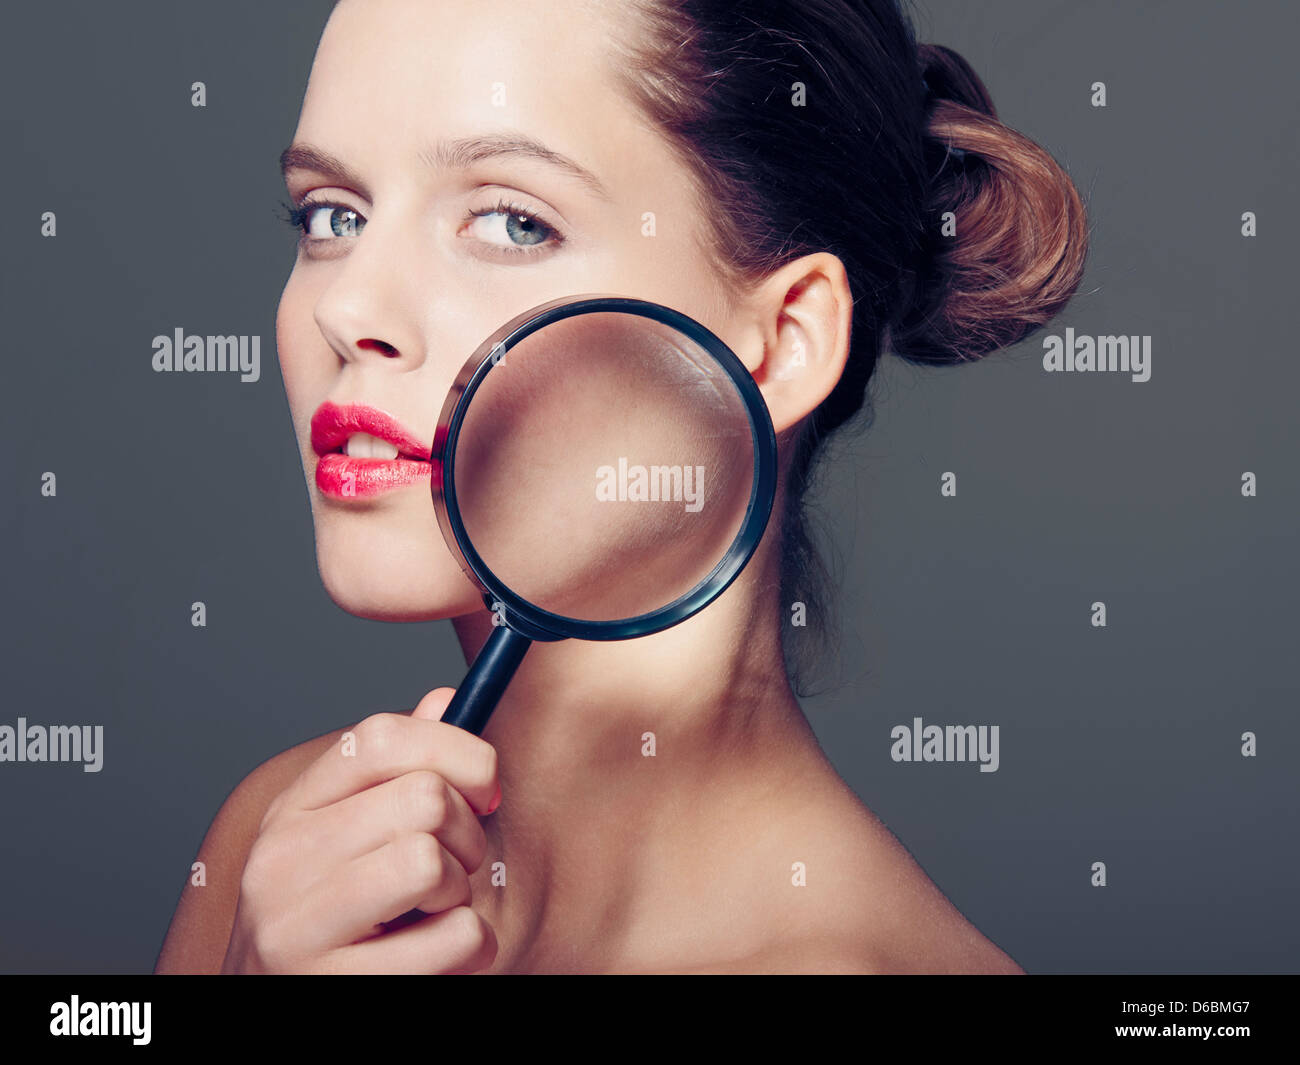 Woman holding magnifying glass to face Stock Photo